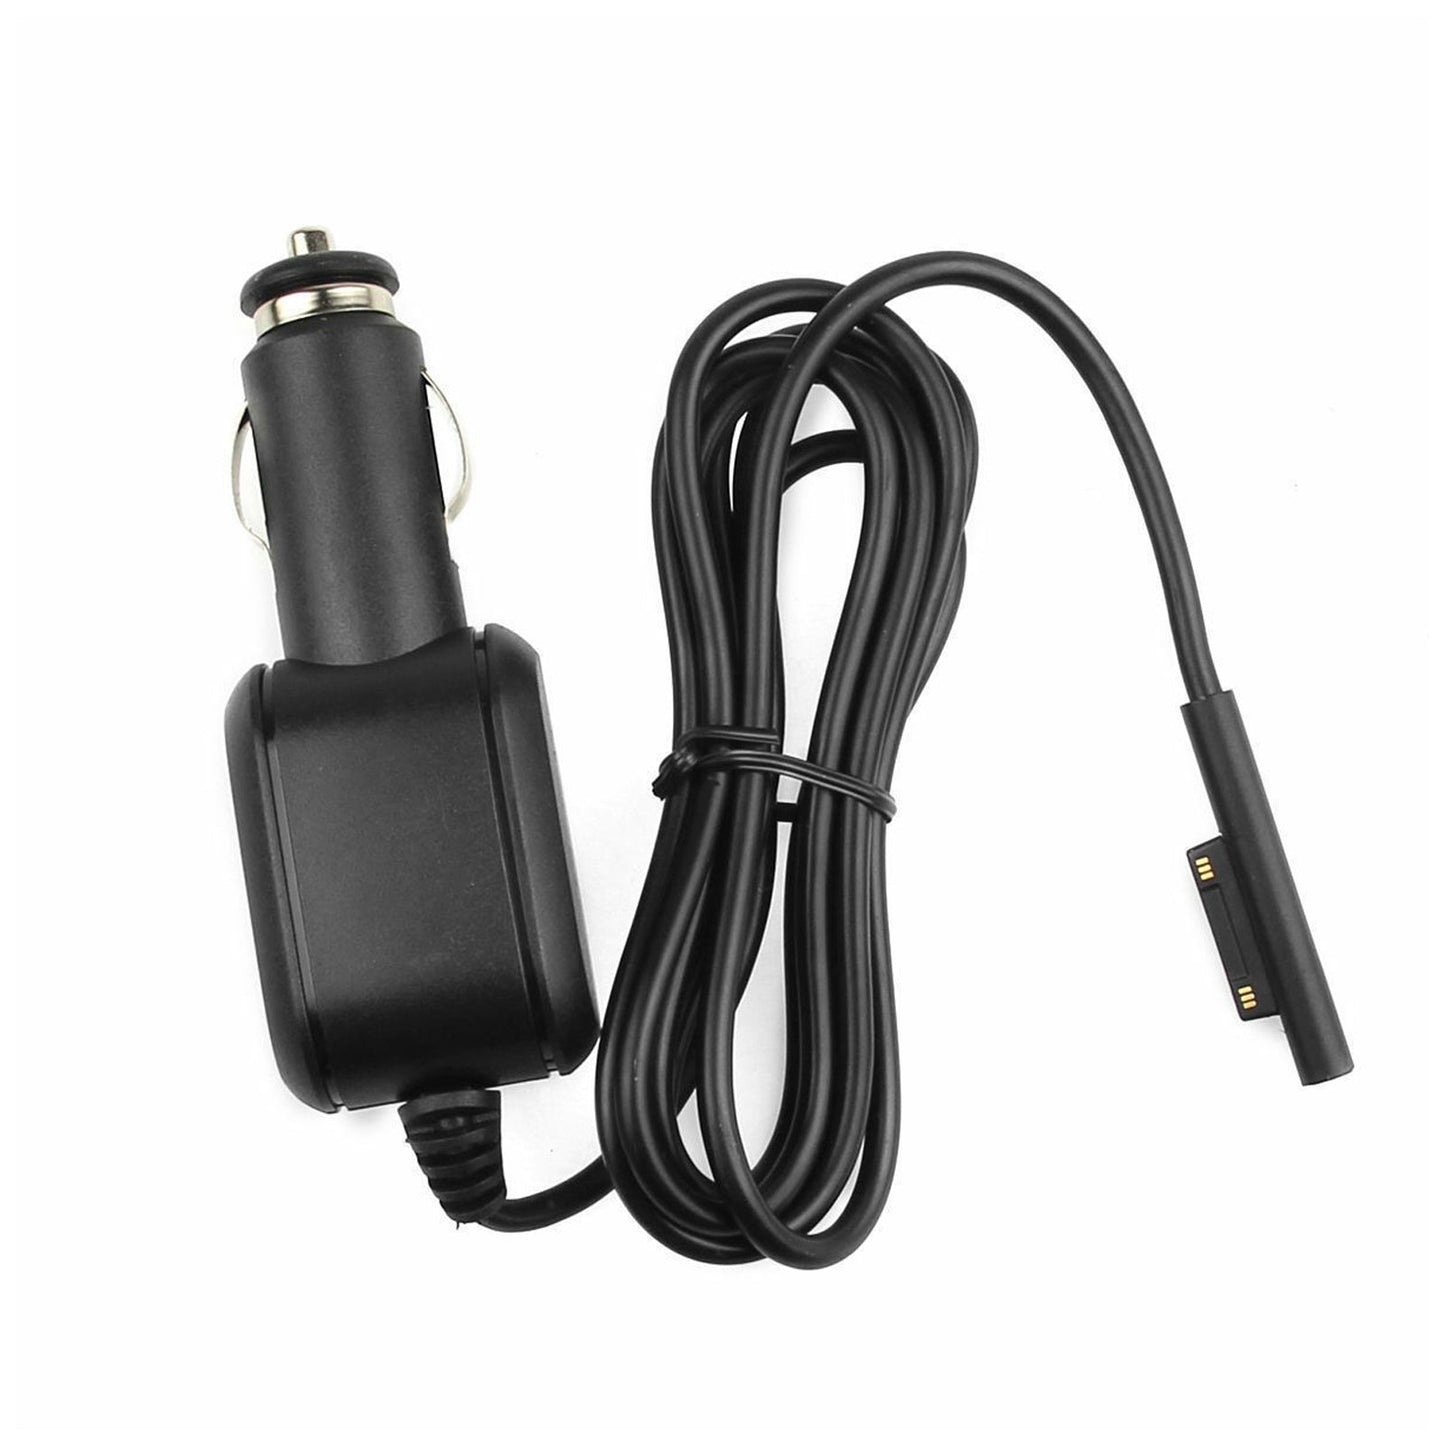 12V Car Charger Cigarette Power Supply Adapter For Microsoft Surface Pro 4/Pro 3